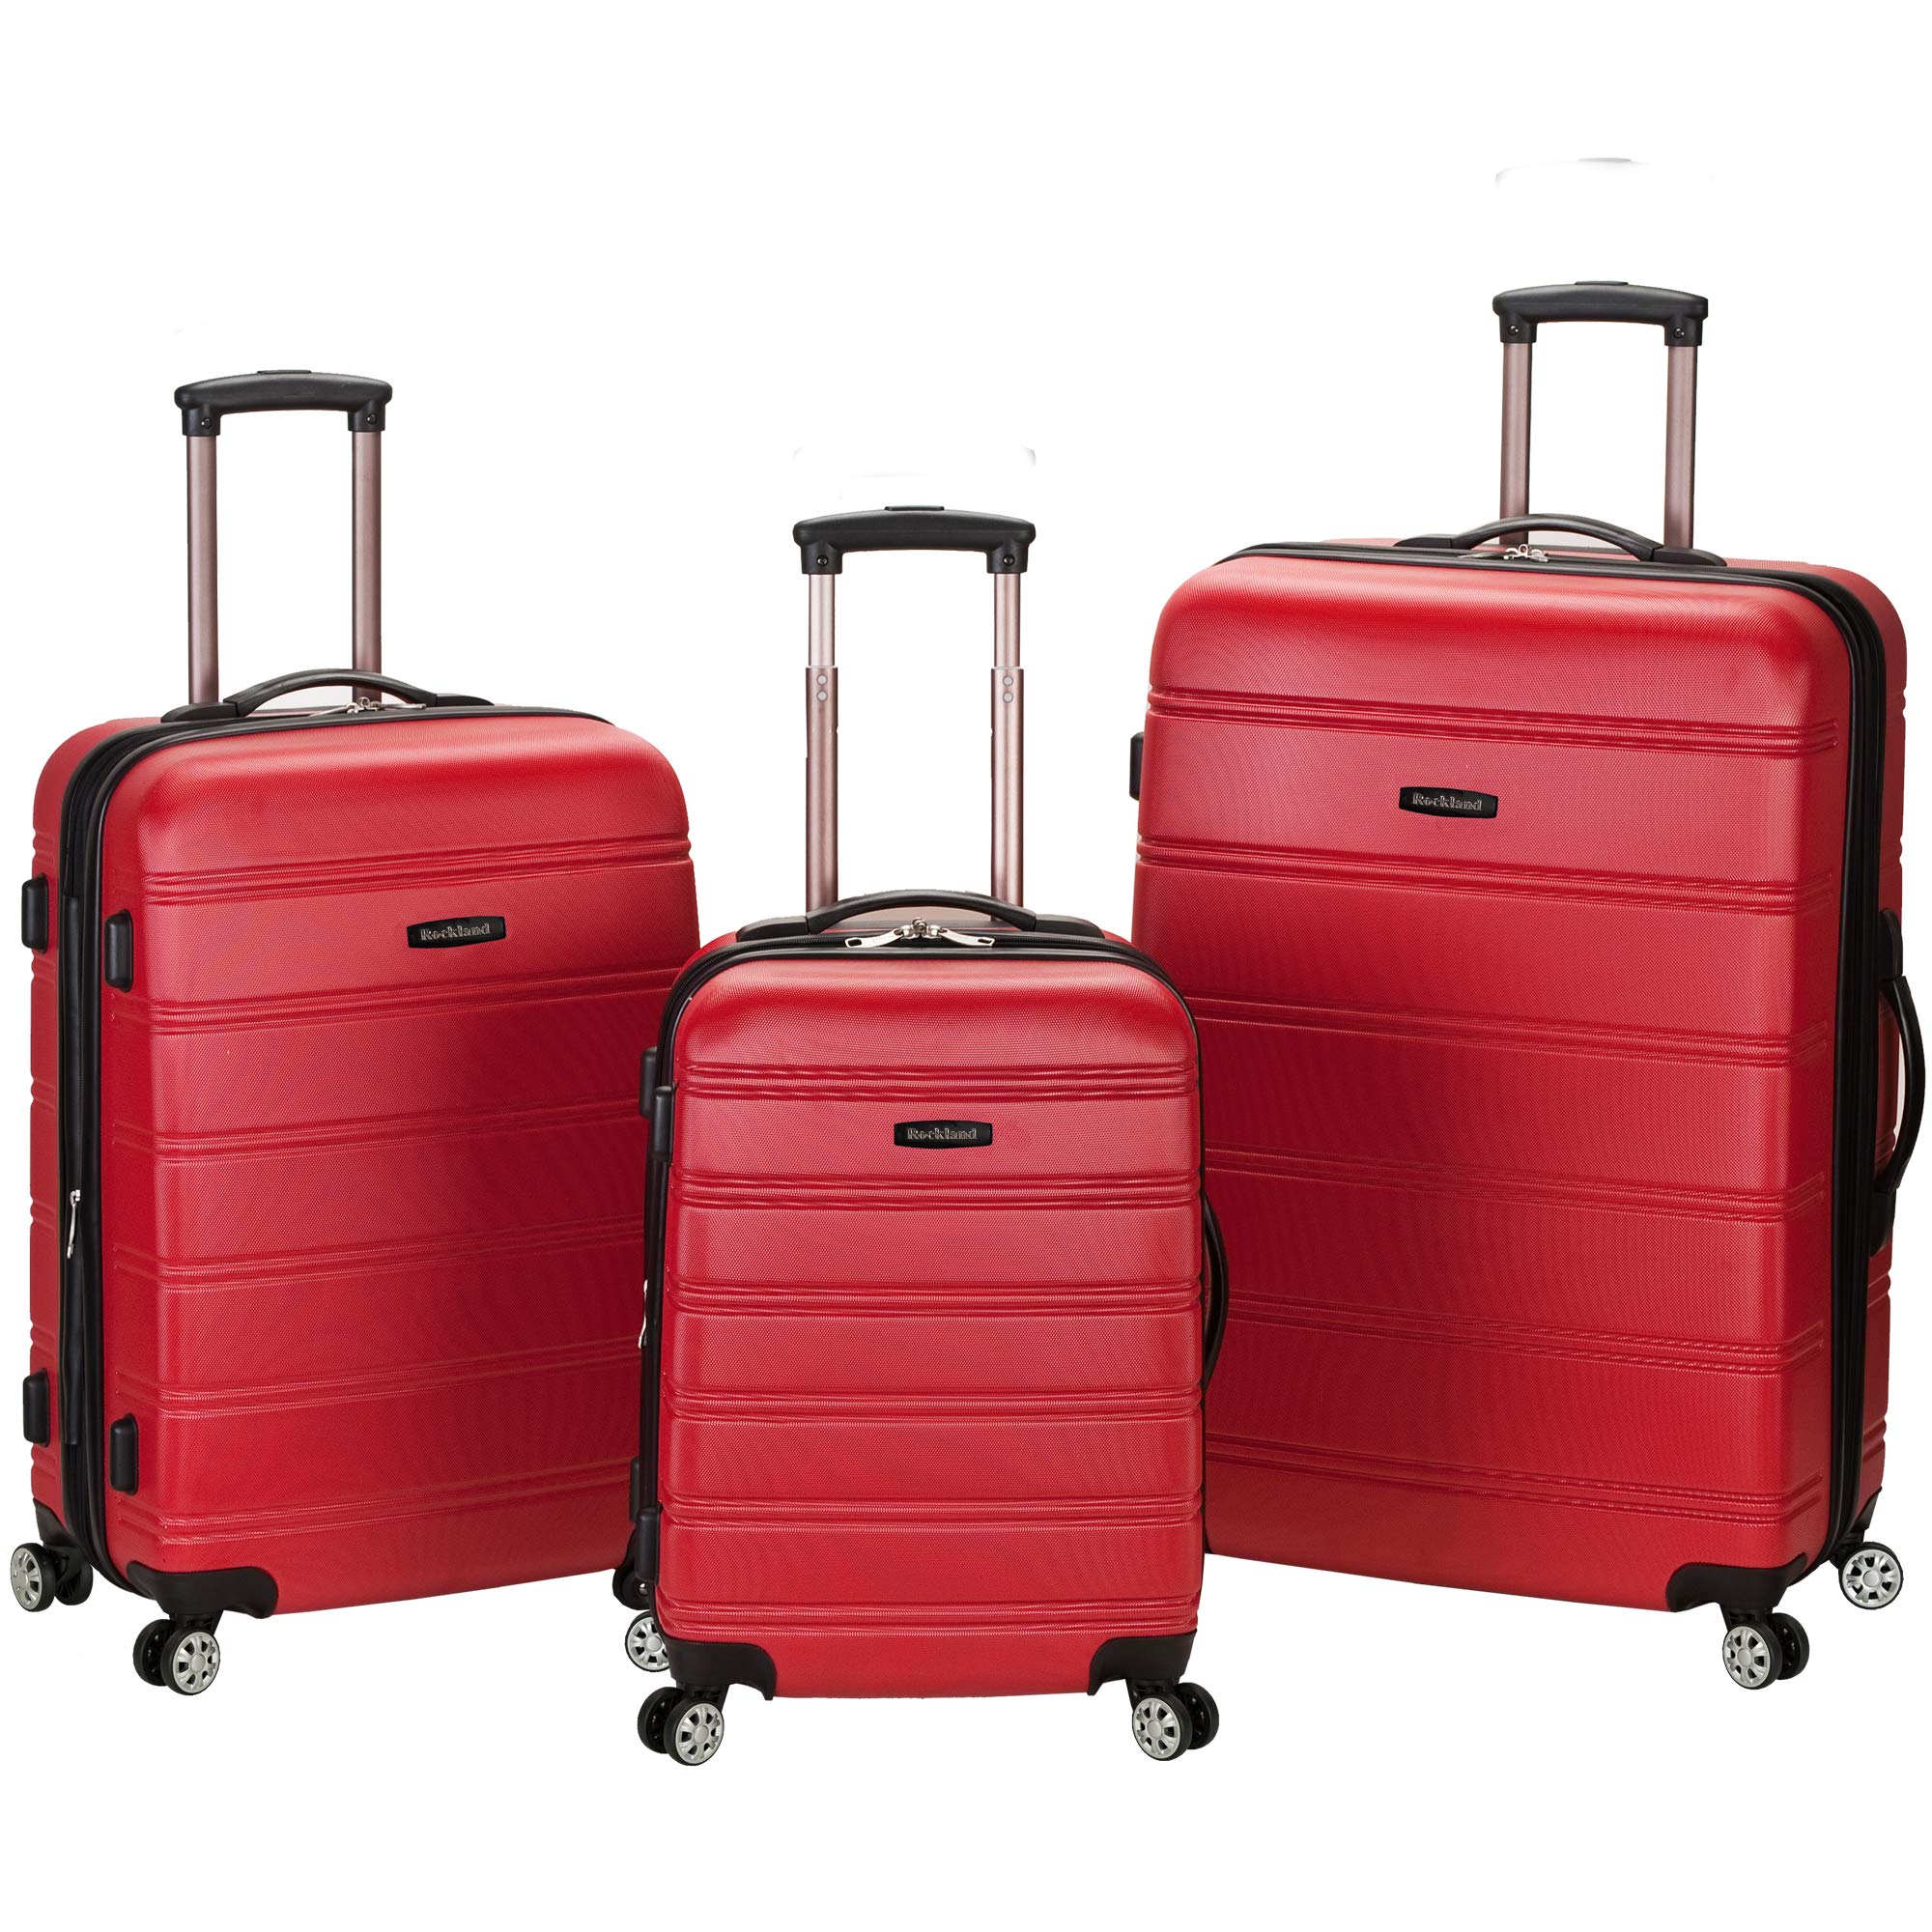 The red suitcase, choosing a red suitcase can be an exciting and practical decision for travelers looking to add a pop of color and